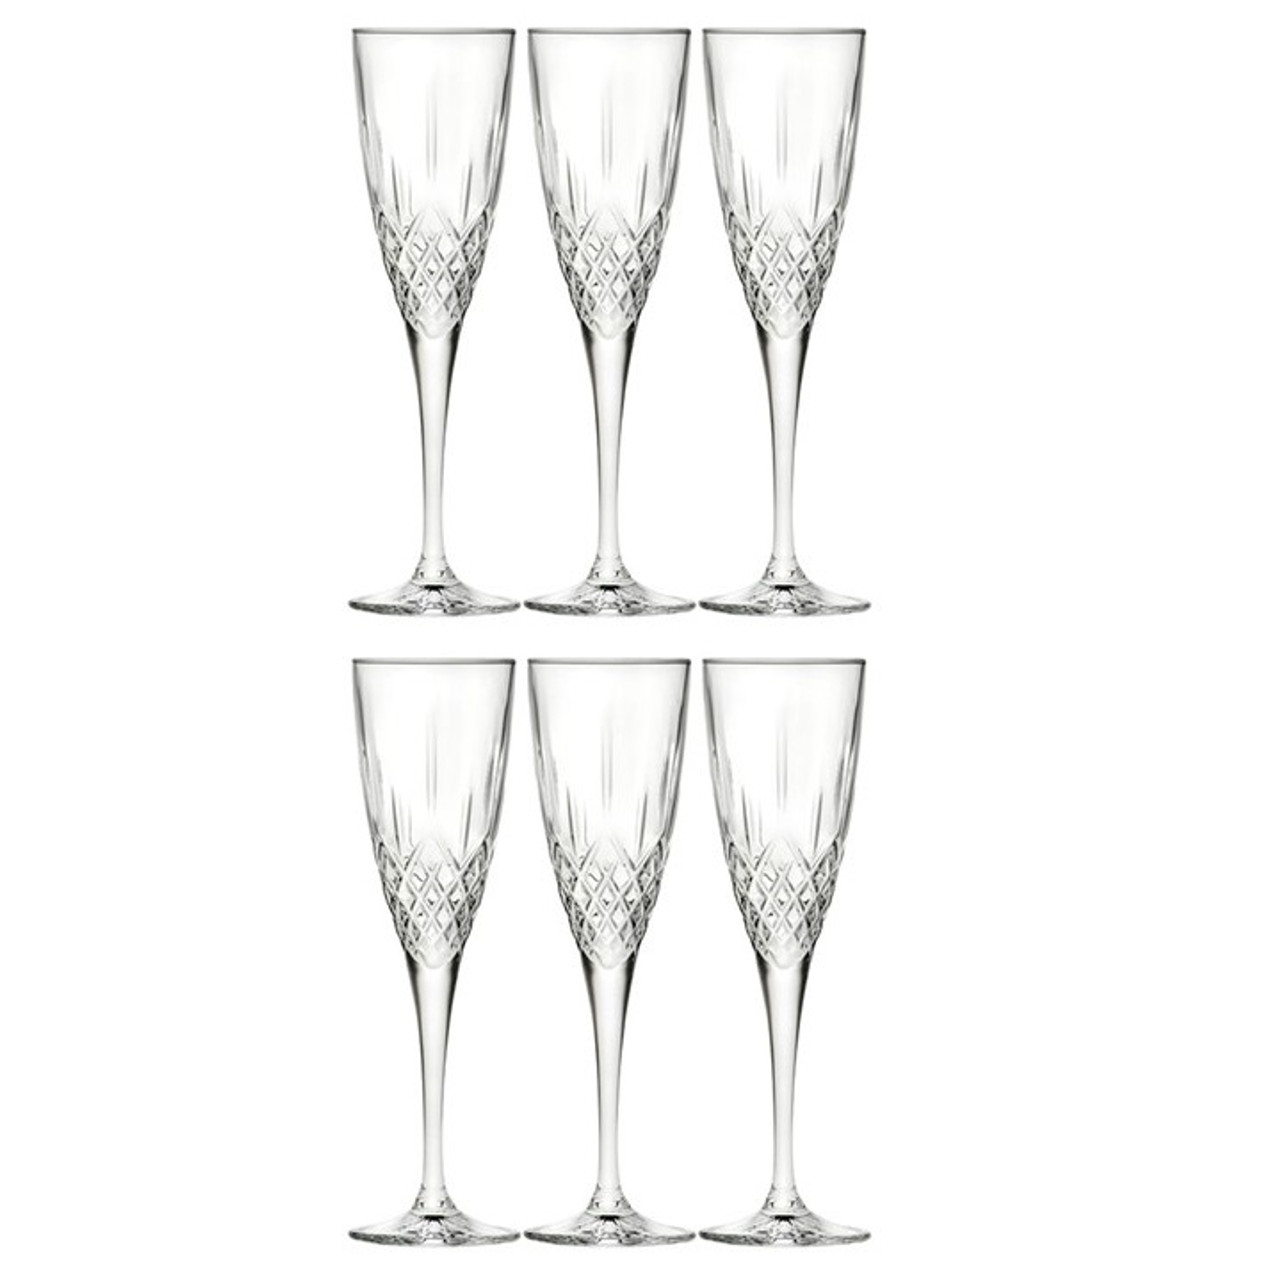 https://cdn11.bigcommerce.com/s-9mnzpxwffi/images/stencil/1280x1280/products/297/3176/crystal-champagne-flute-set_of_6-diamond-pattern-glasses__59200.1668710957.jpg?c=2